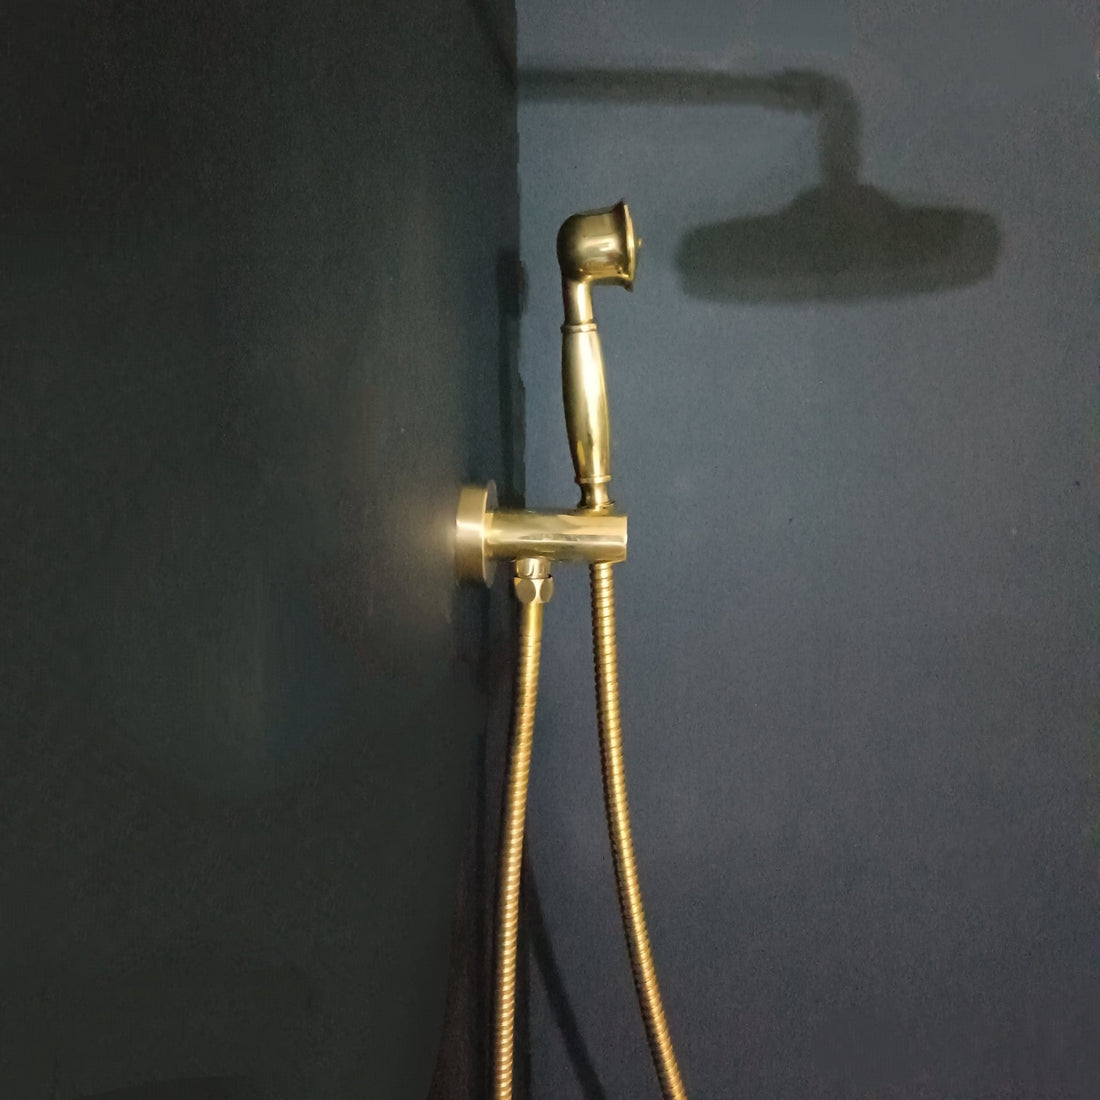 Unlacquered Brass Concealed Shower with cross handle - Brassna